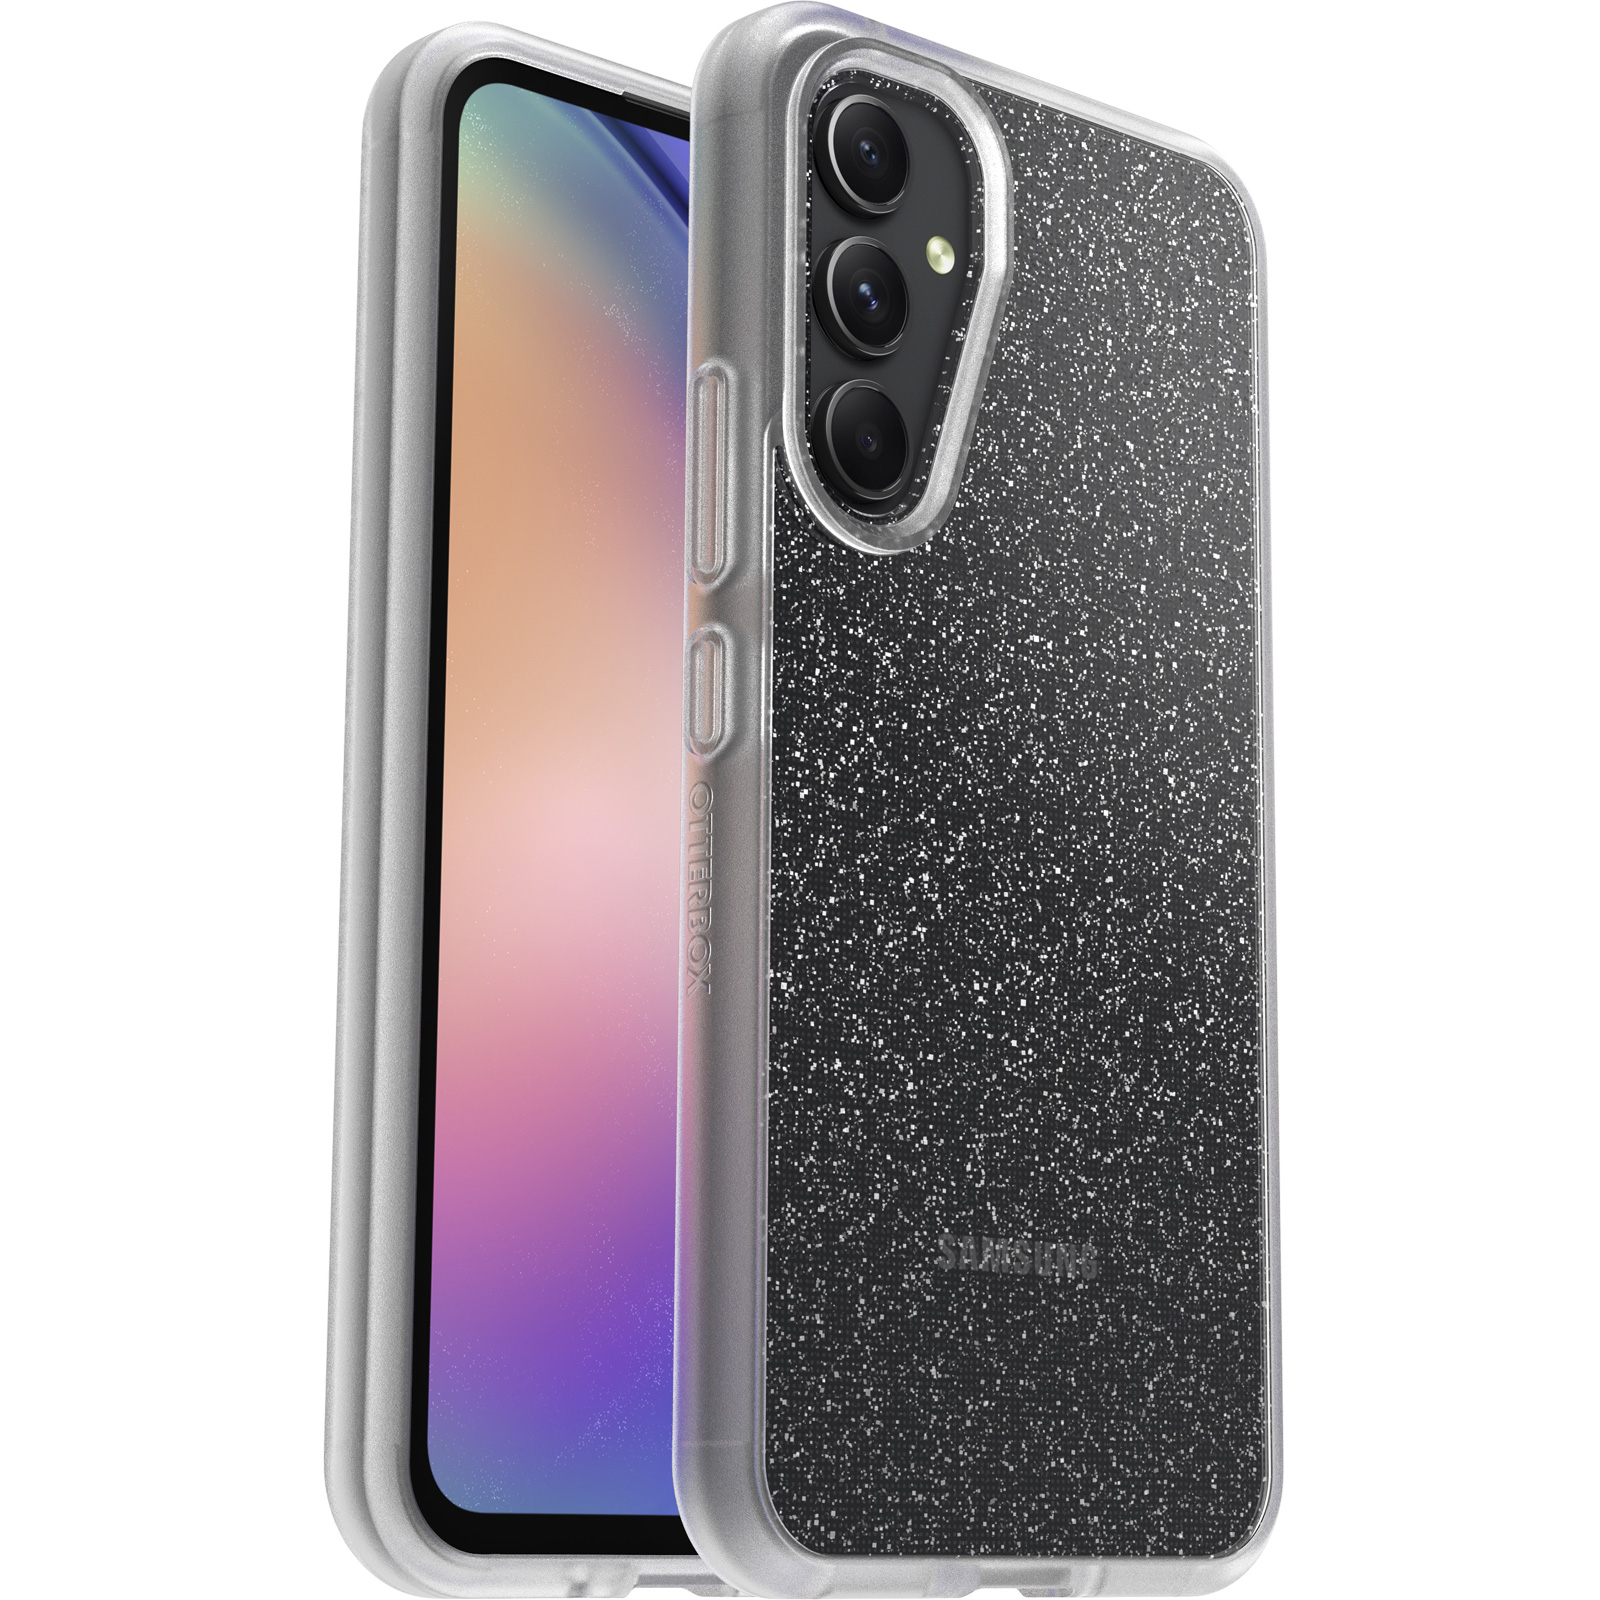 https://www.otterbox.com/on/demandware.static/-/Sites-masterCatalog/default/dw8fd37ff4/productimages/dis/cases-screen-protection/react-galaxy-a54-5g/react-galaxy-a54-5g-stardust-1.jpg